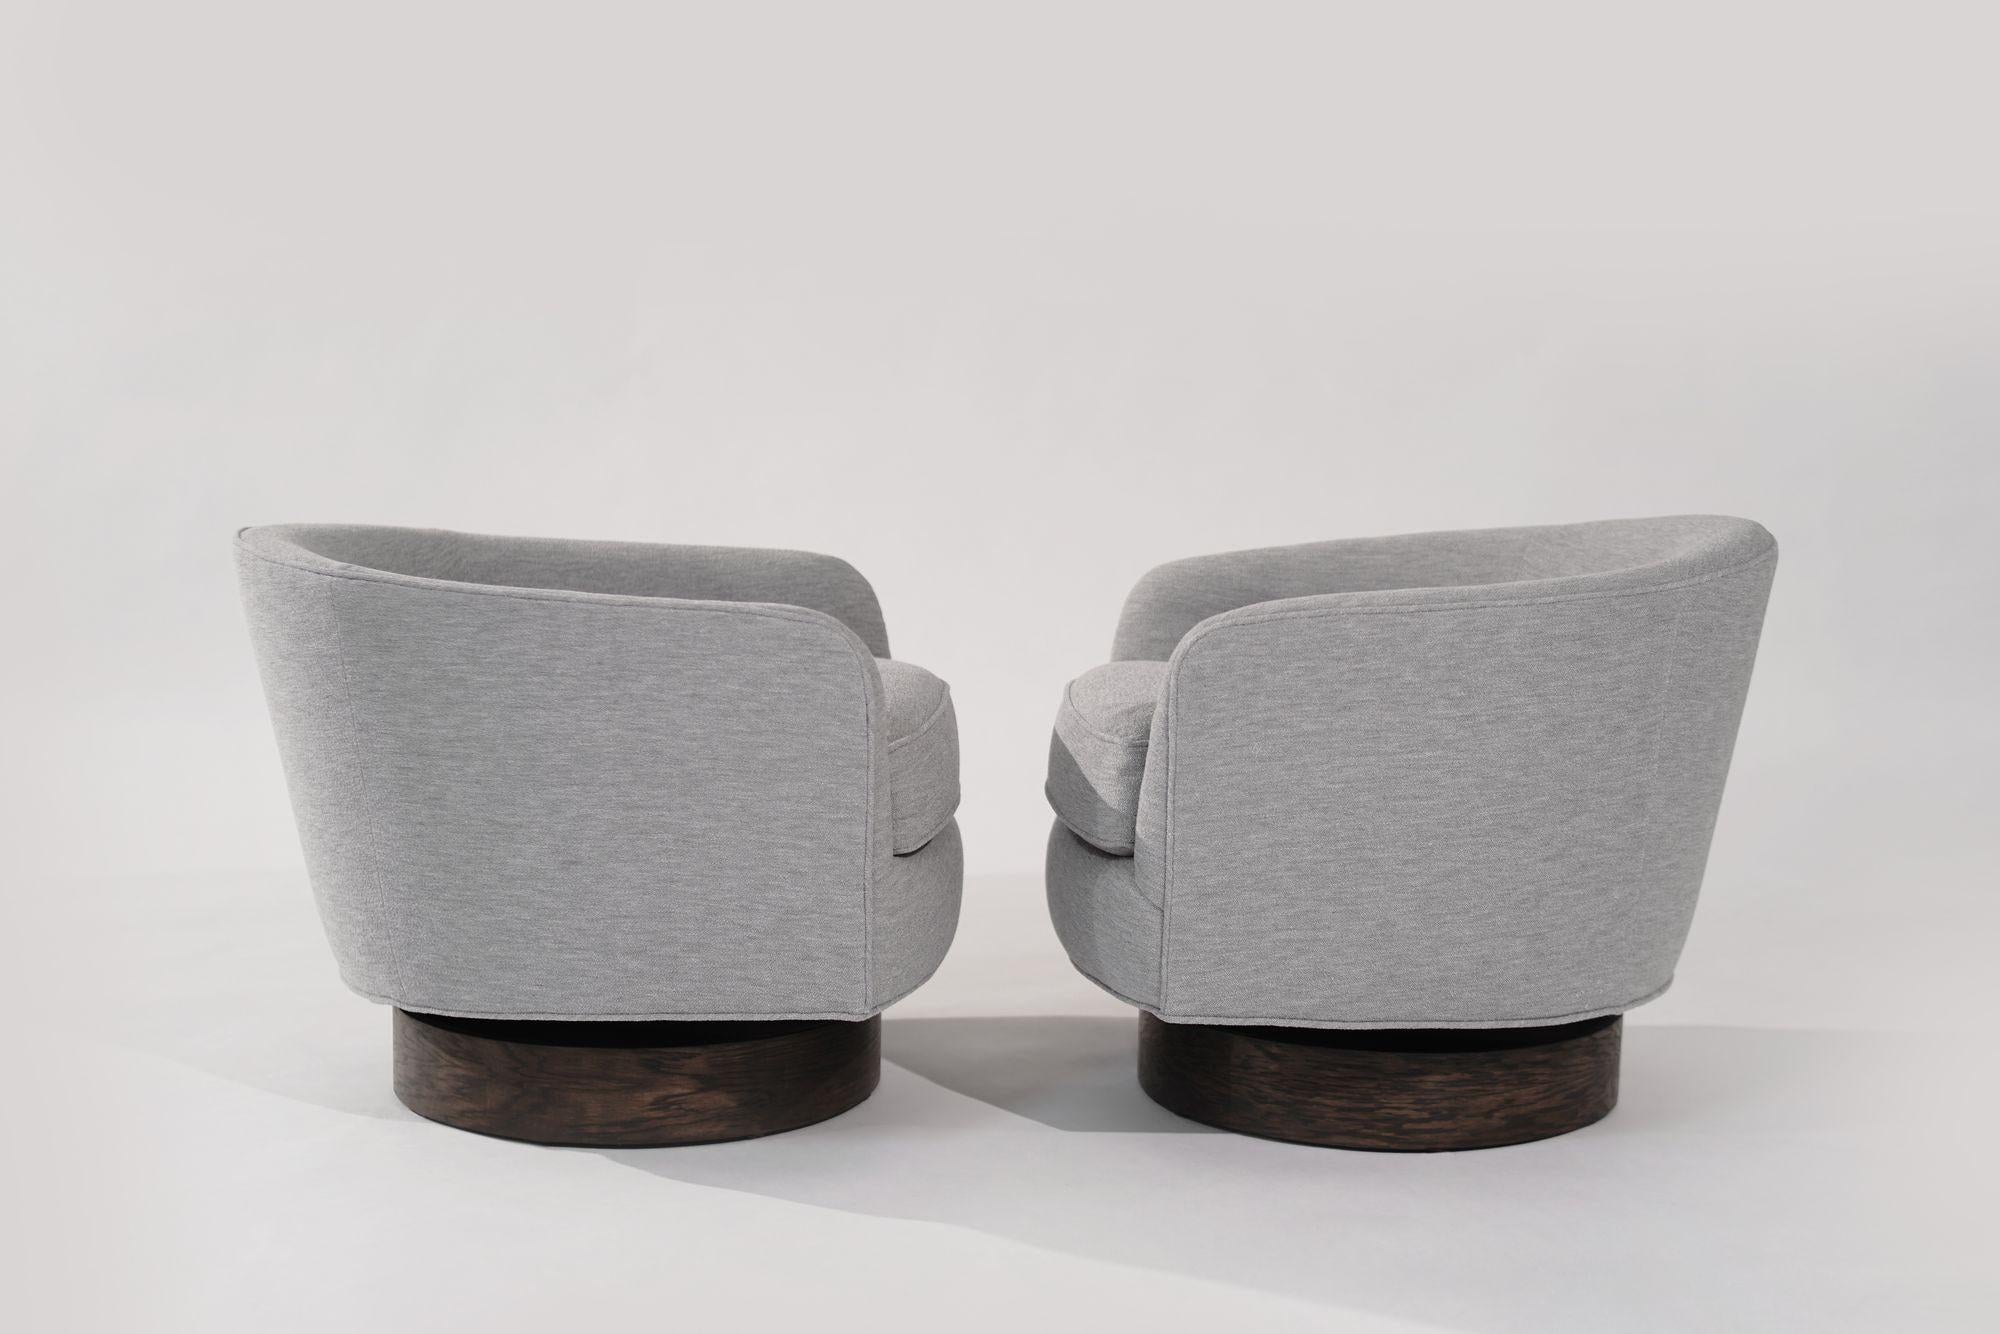 Step back in time with our vintage swivel tilt lounge chairs, circa 1960-1969, now reborn in chic grey bouclé upholstery. Fully restored oak swivel bases ensure durability and style. Experience the perfect fusion of mid-century charm and modern